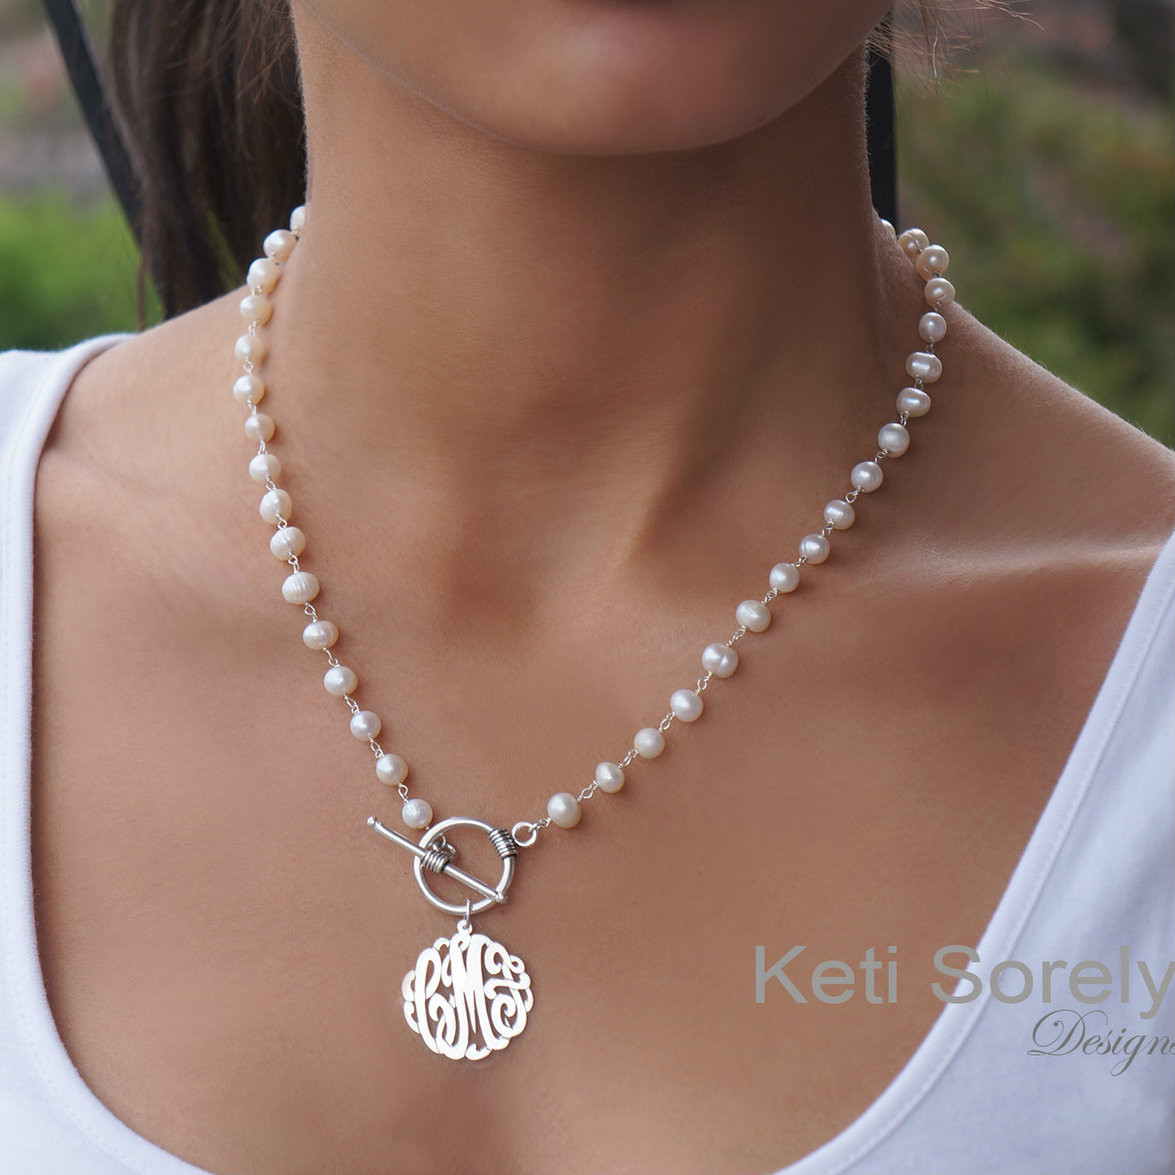 monogram charms necklace